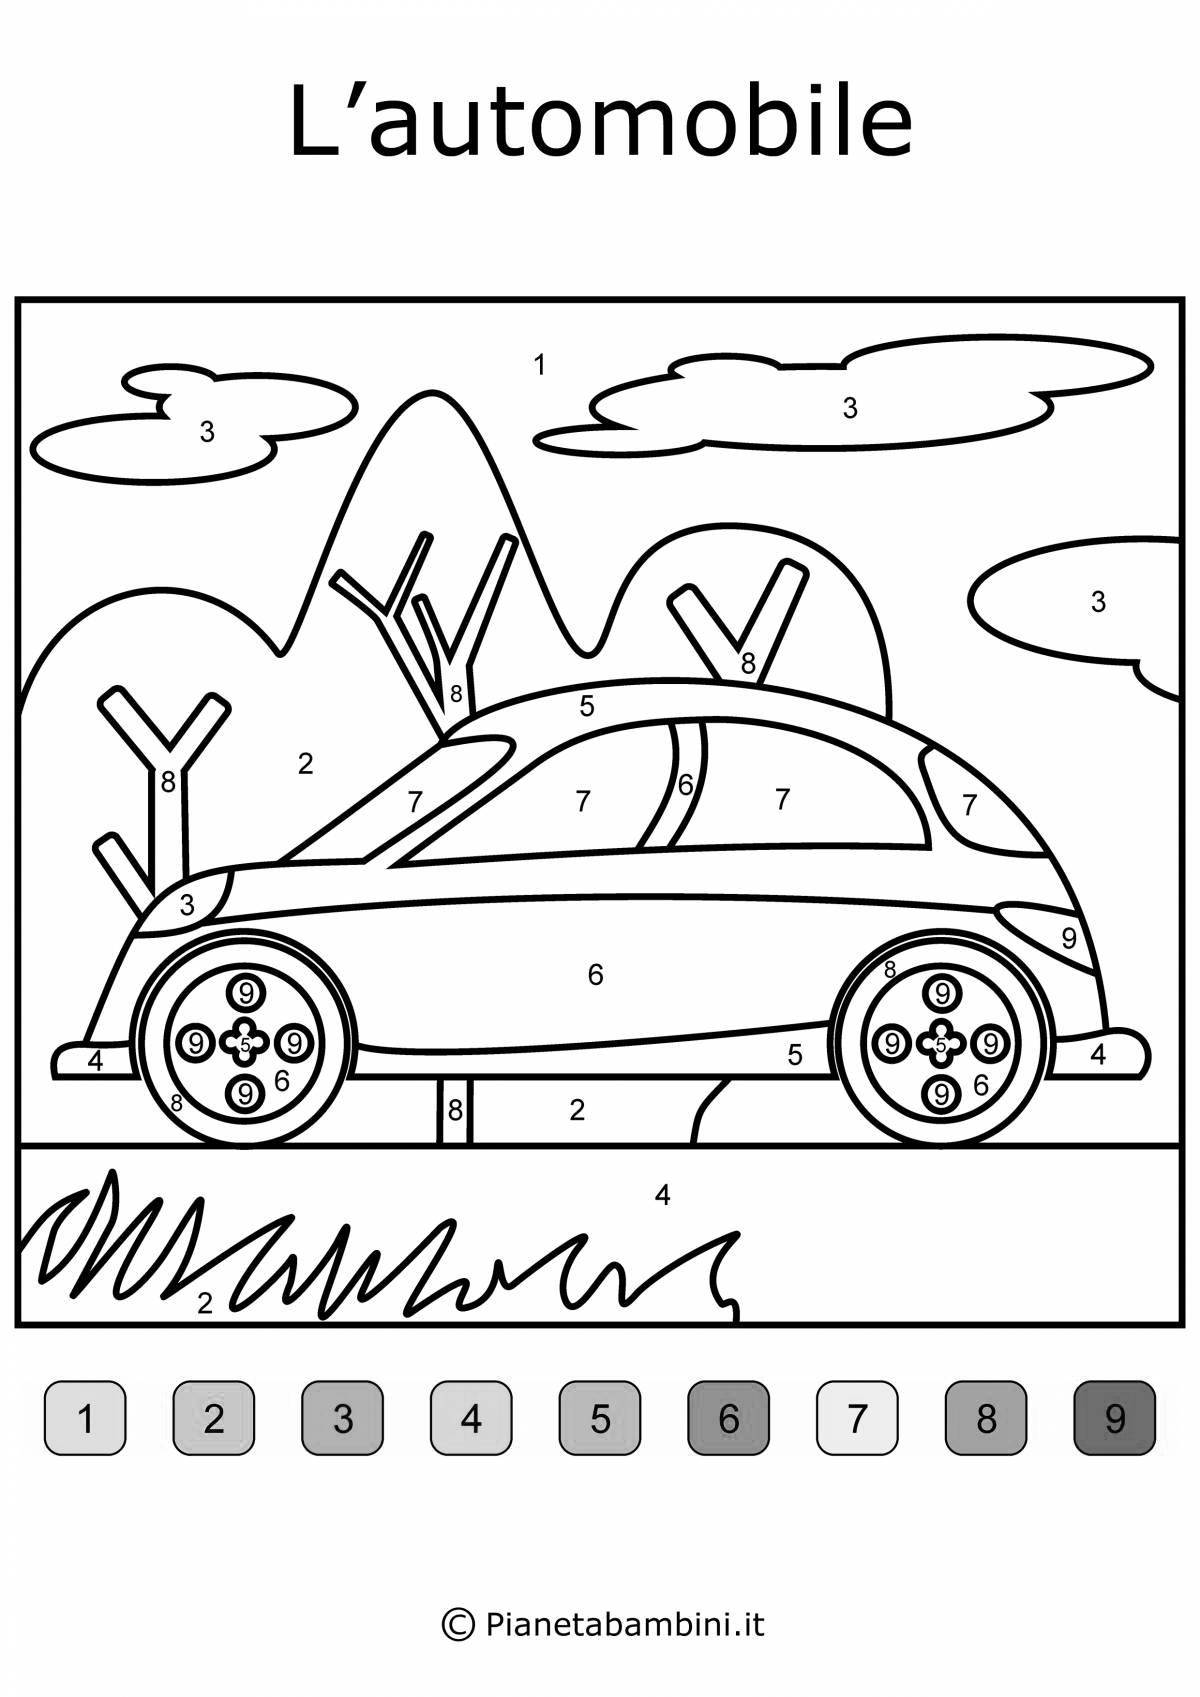 Incredible cars coloring page